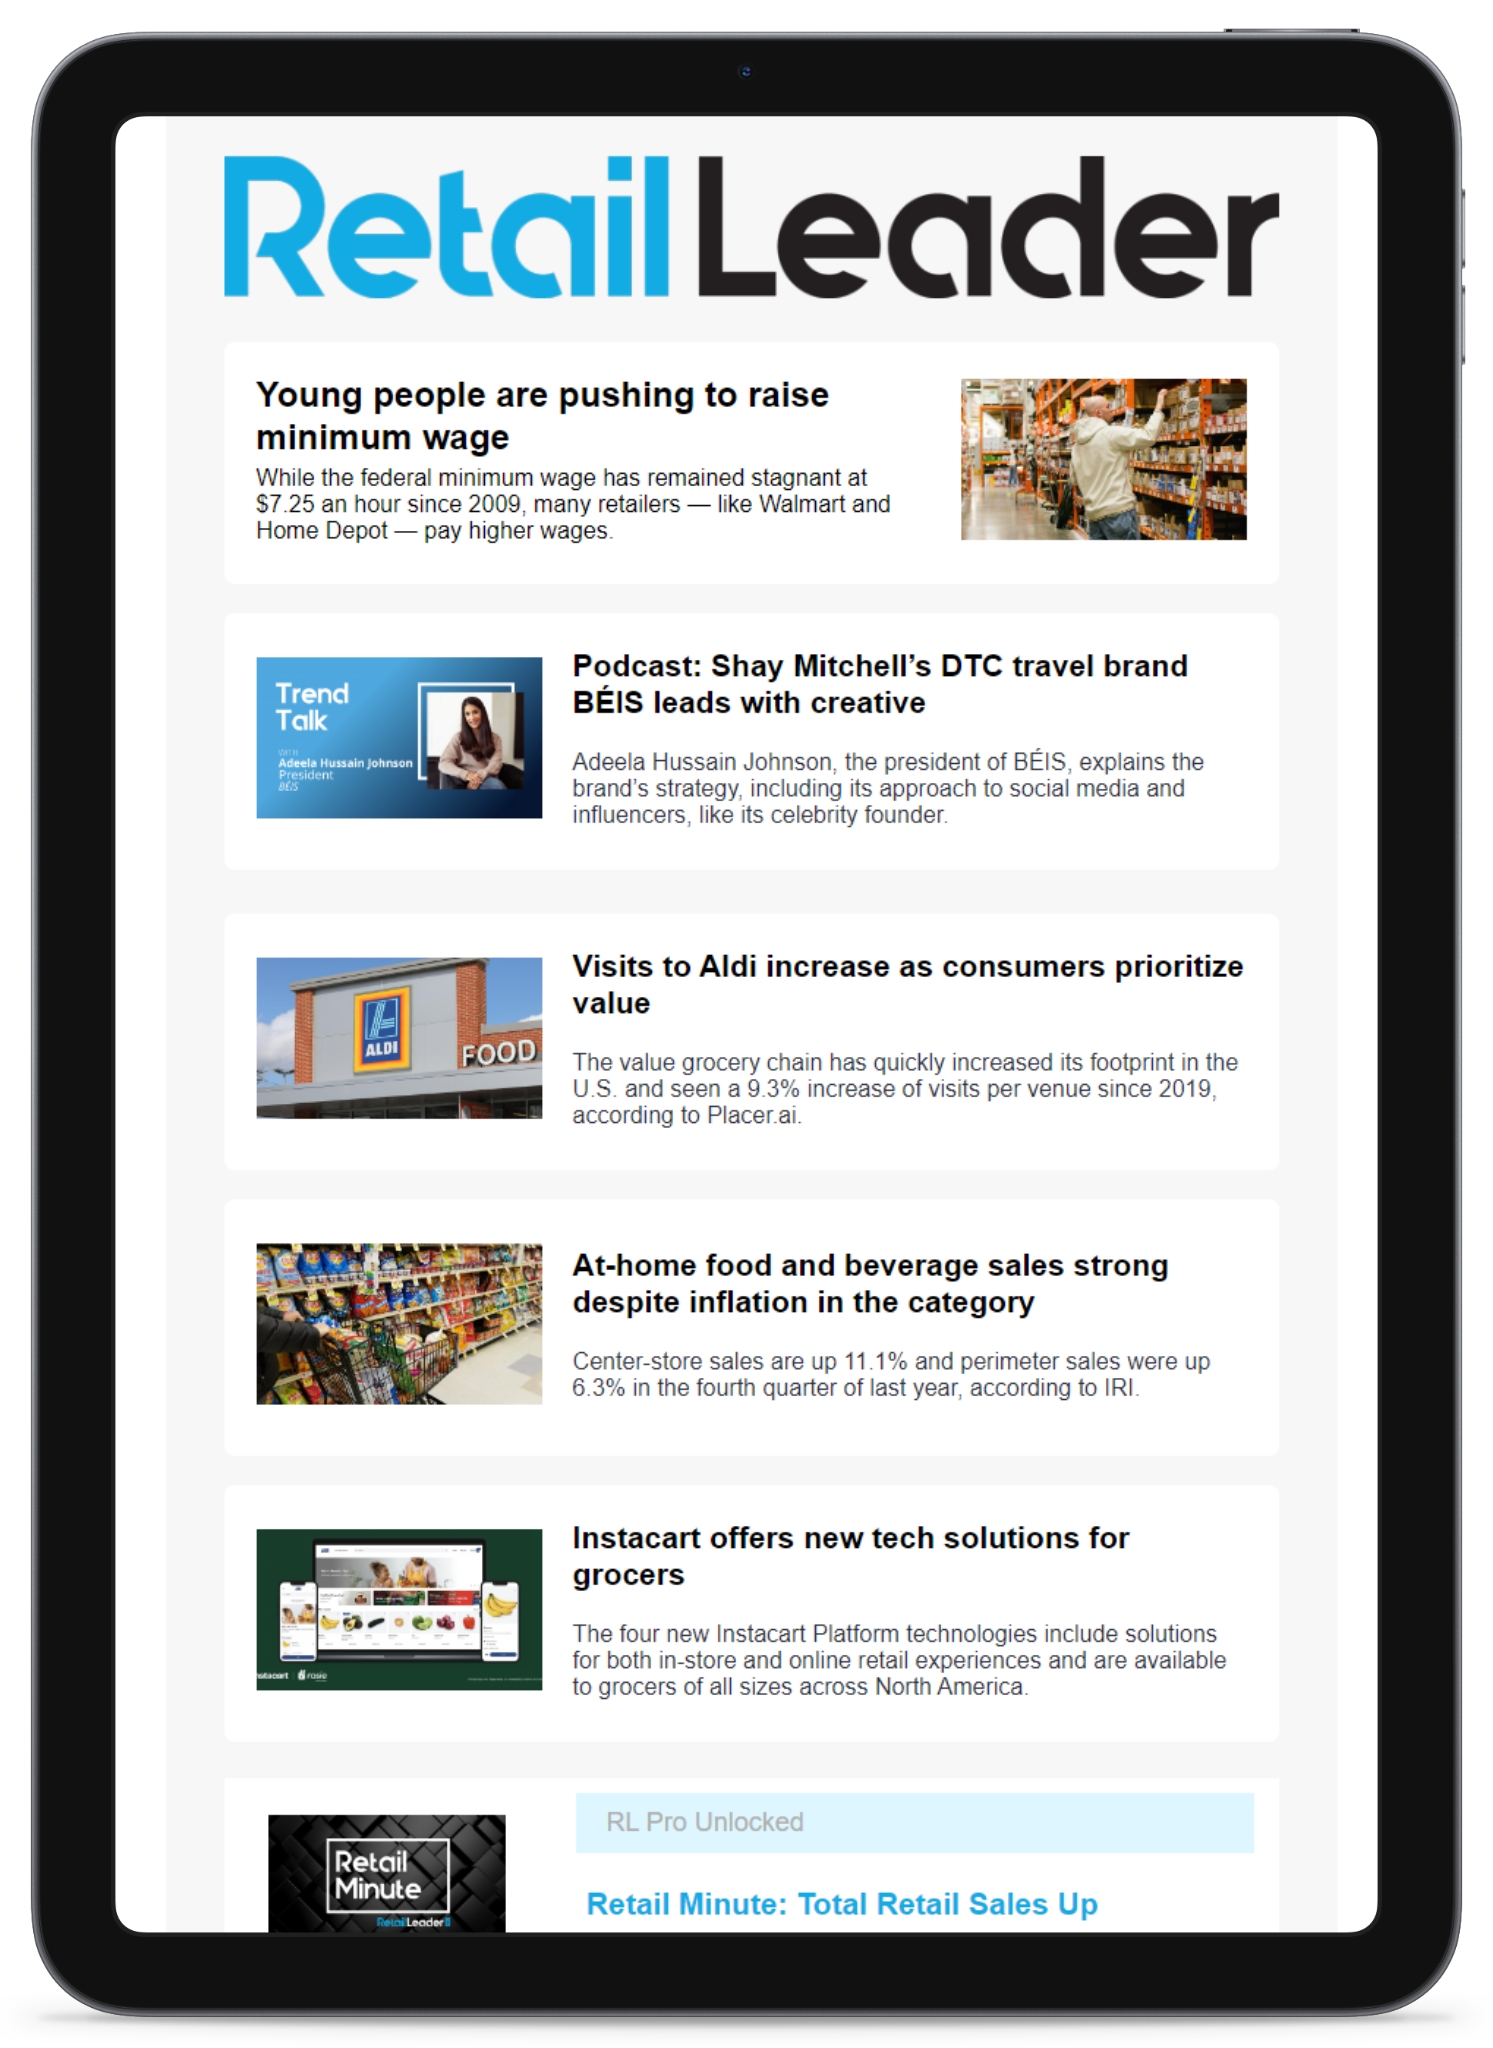 iPad Retail Leader Trend Watch Content